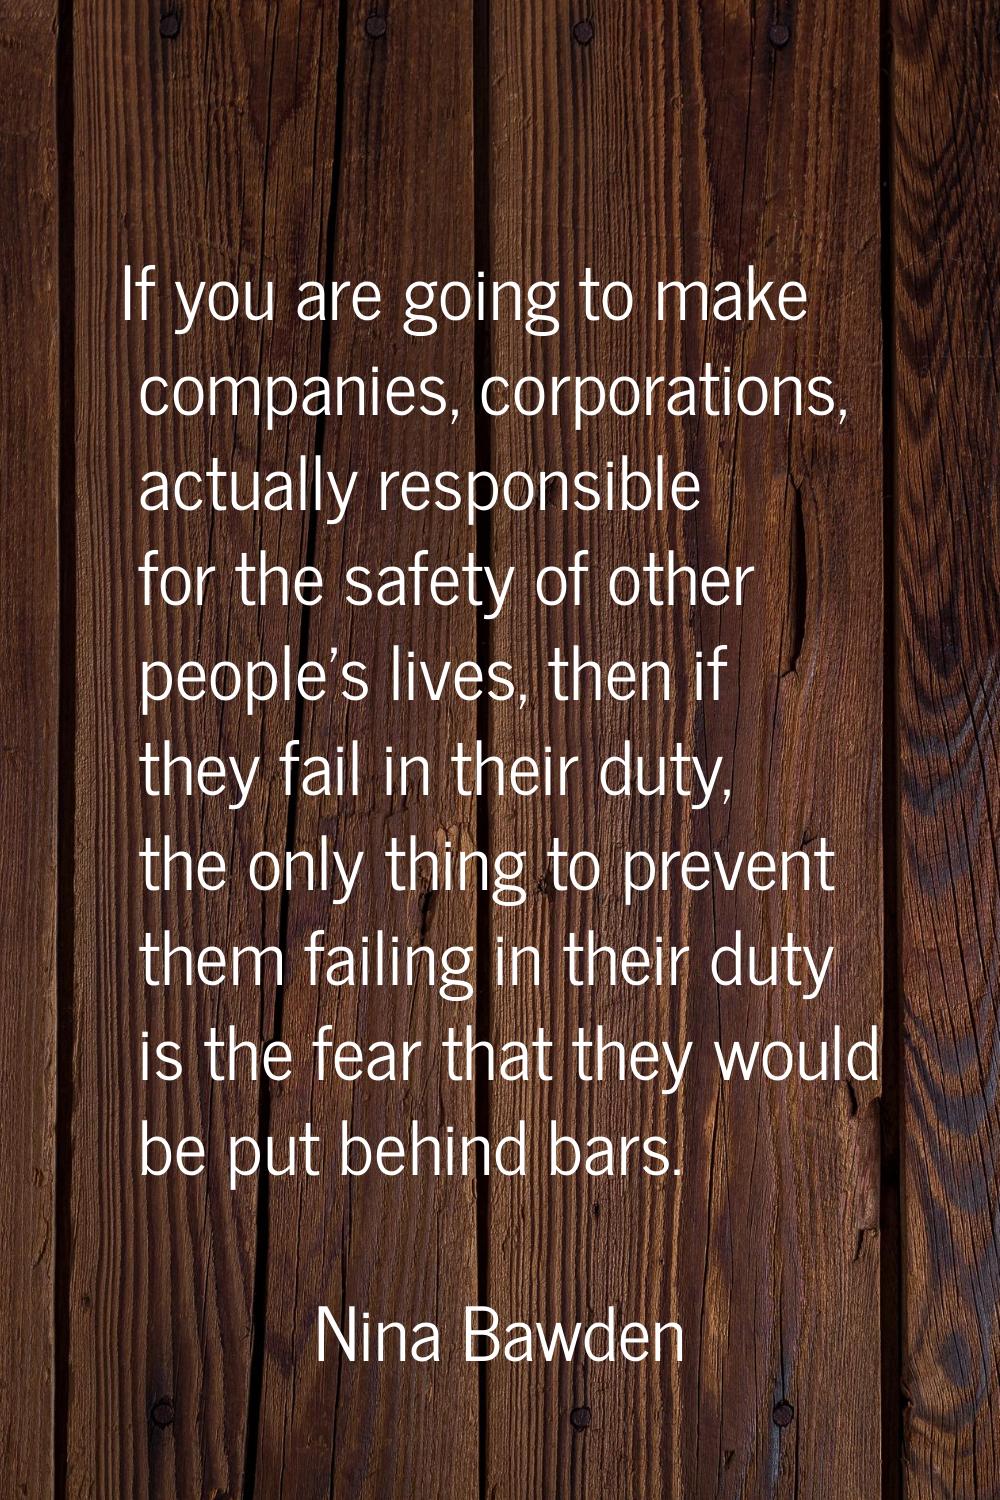 If you are going to make companies, corporations, actually responsible for the safety of other peop